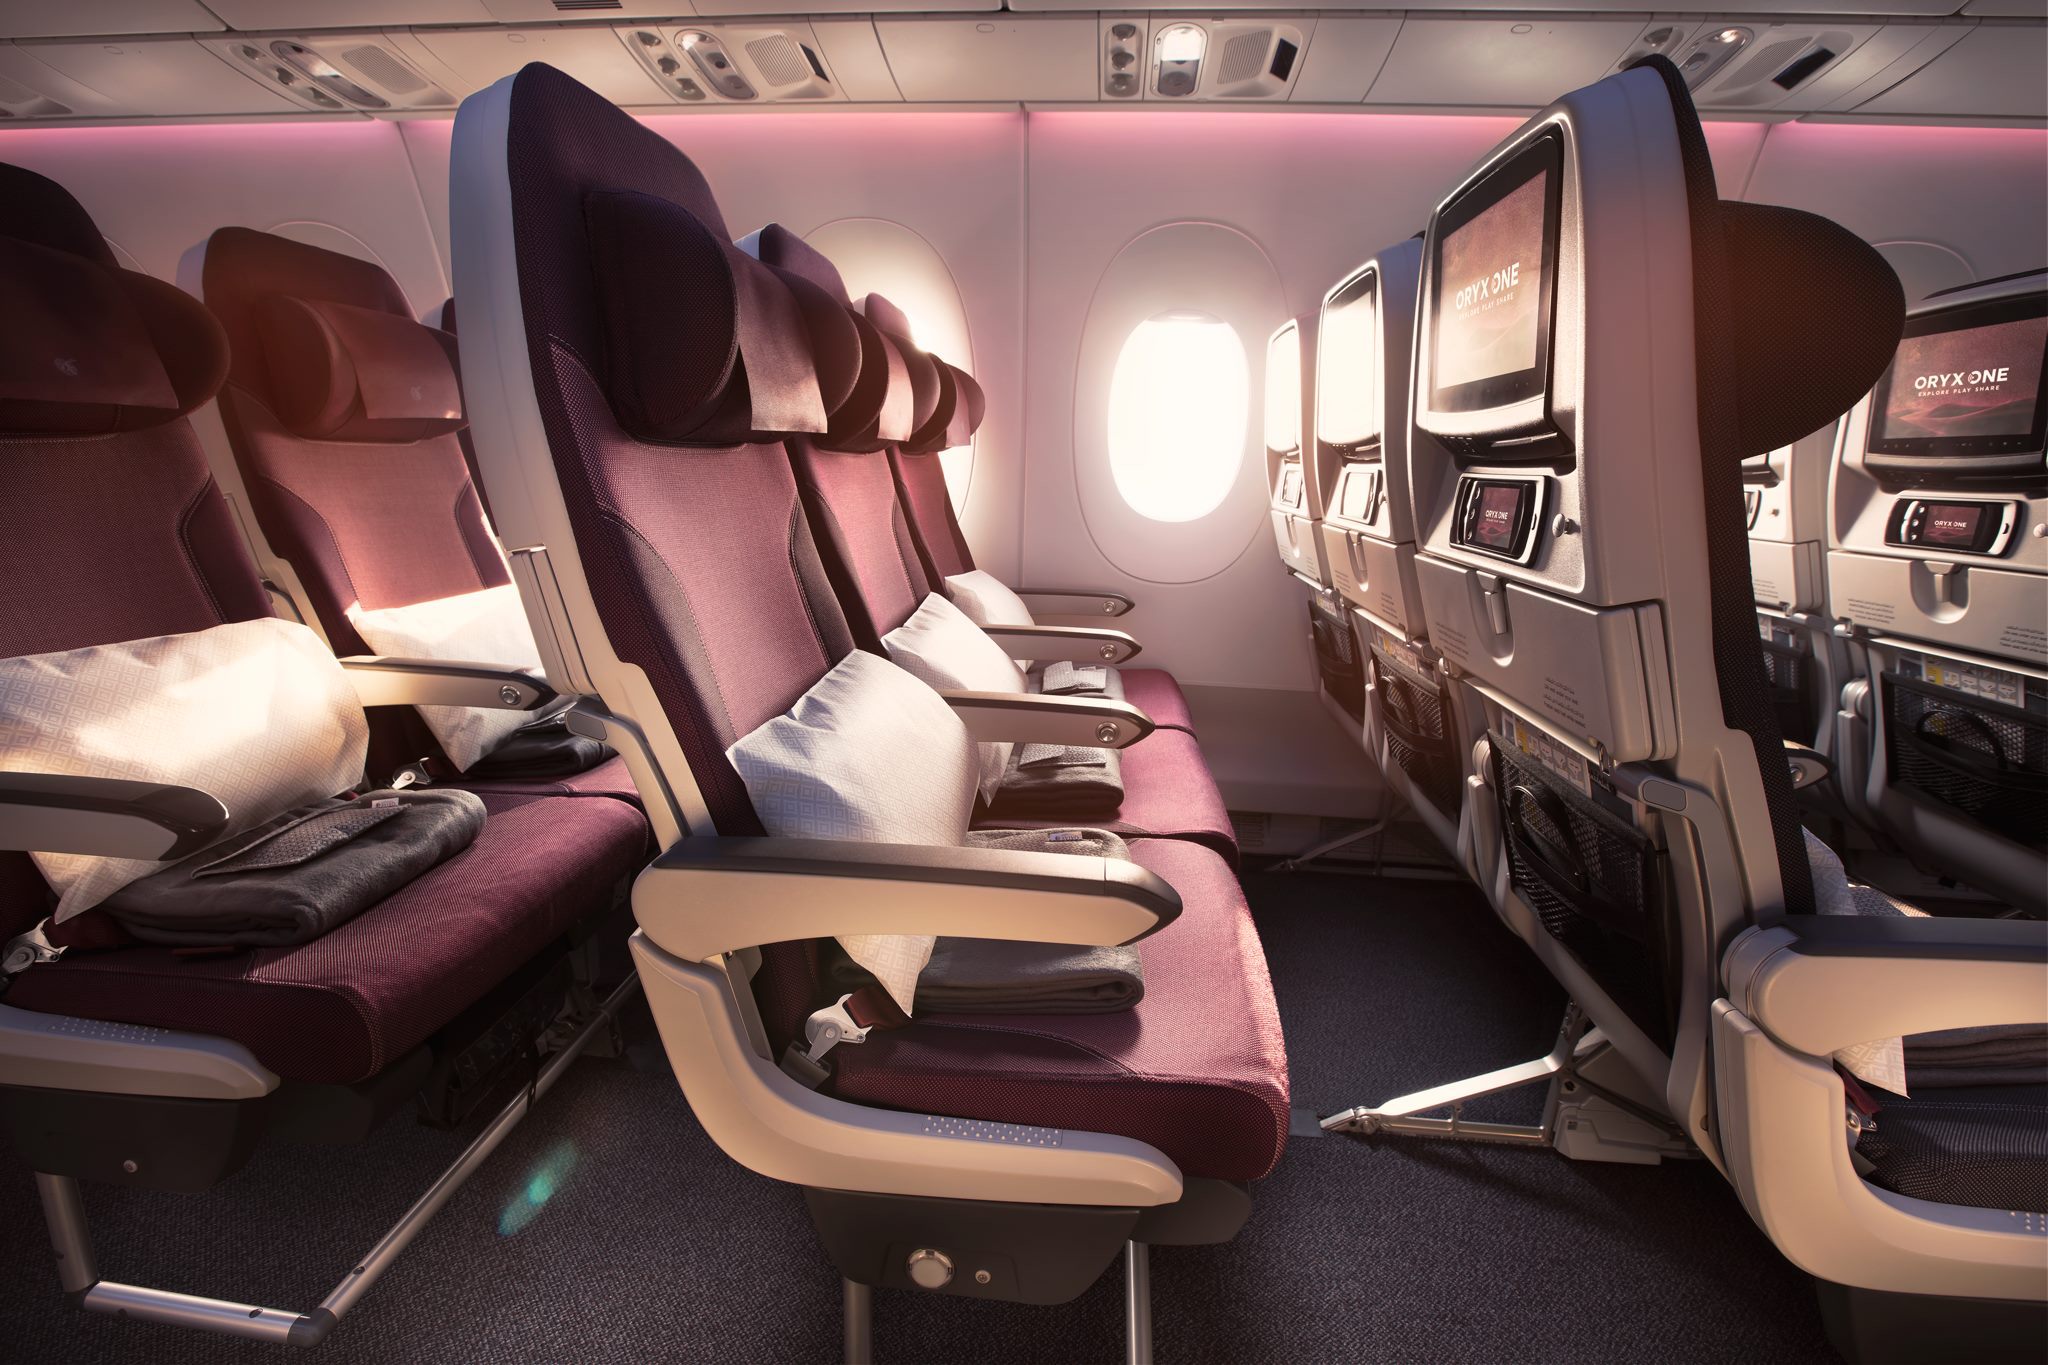 Qatar Airways What Is It Like To Fly Economy On The World S Best